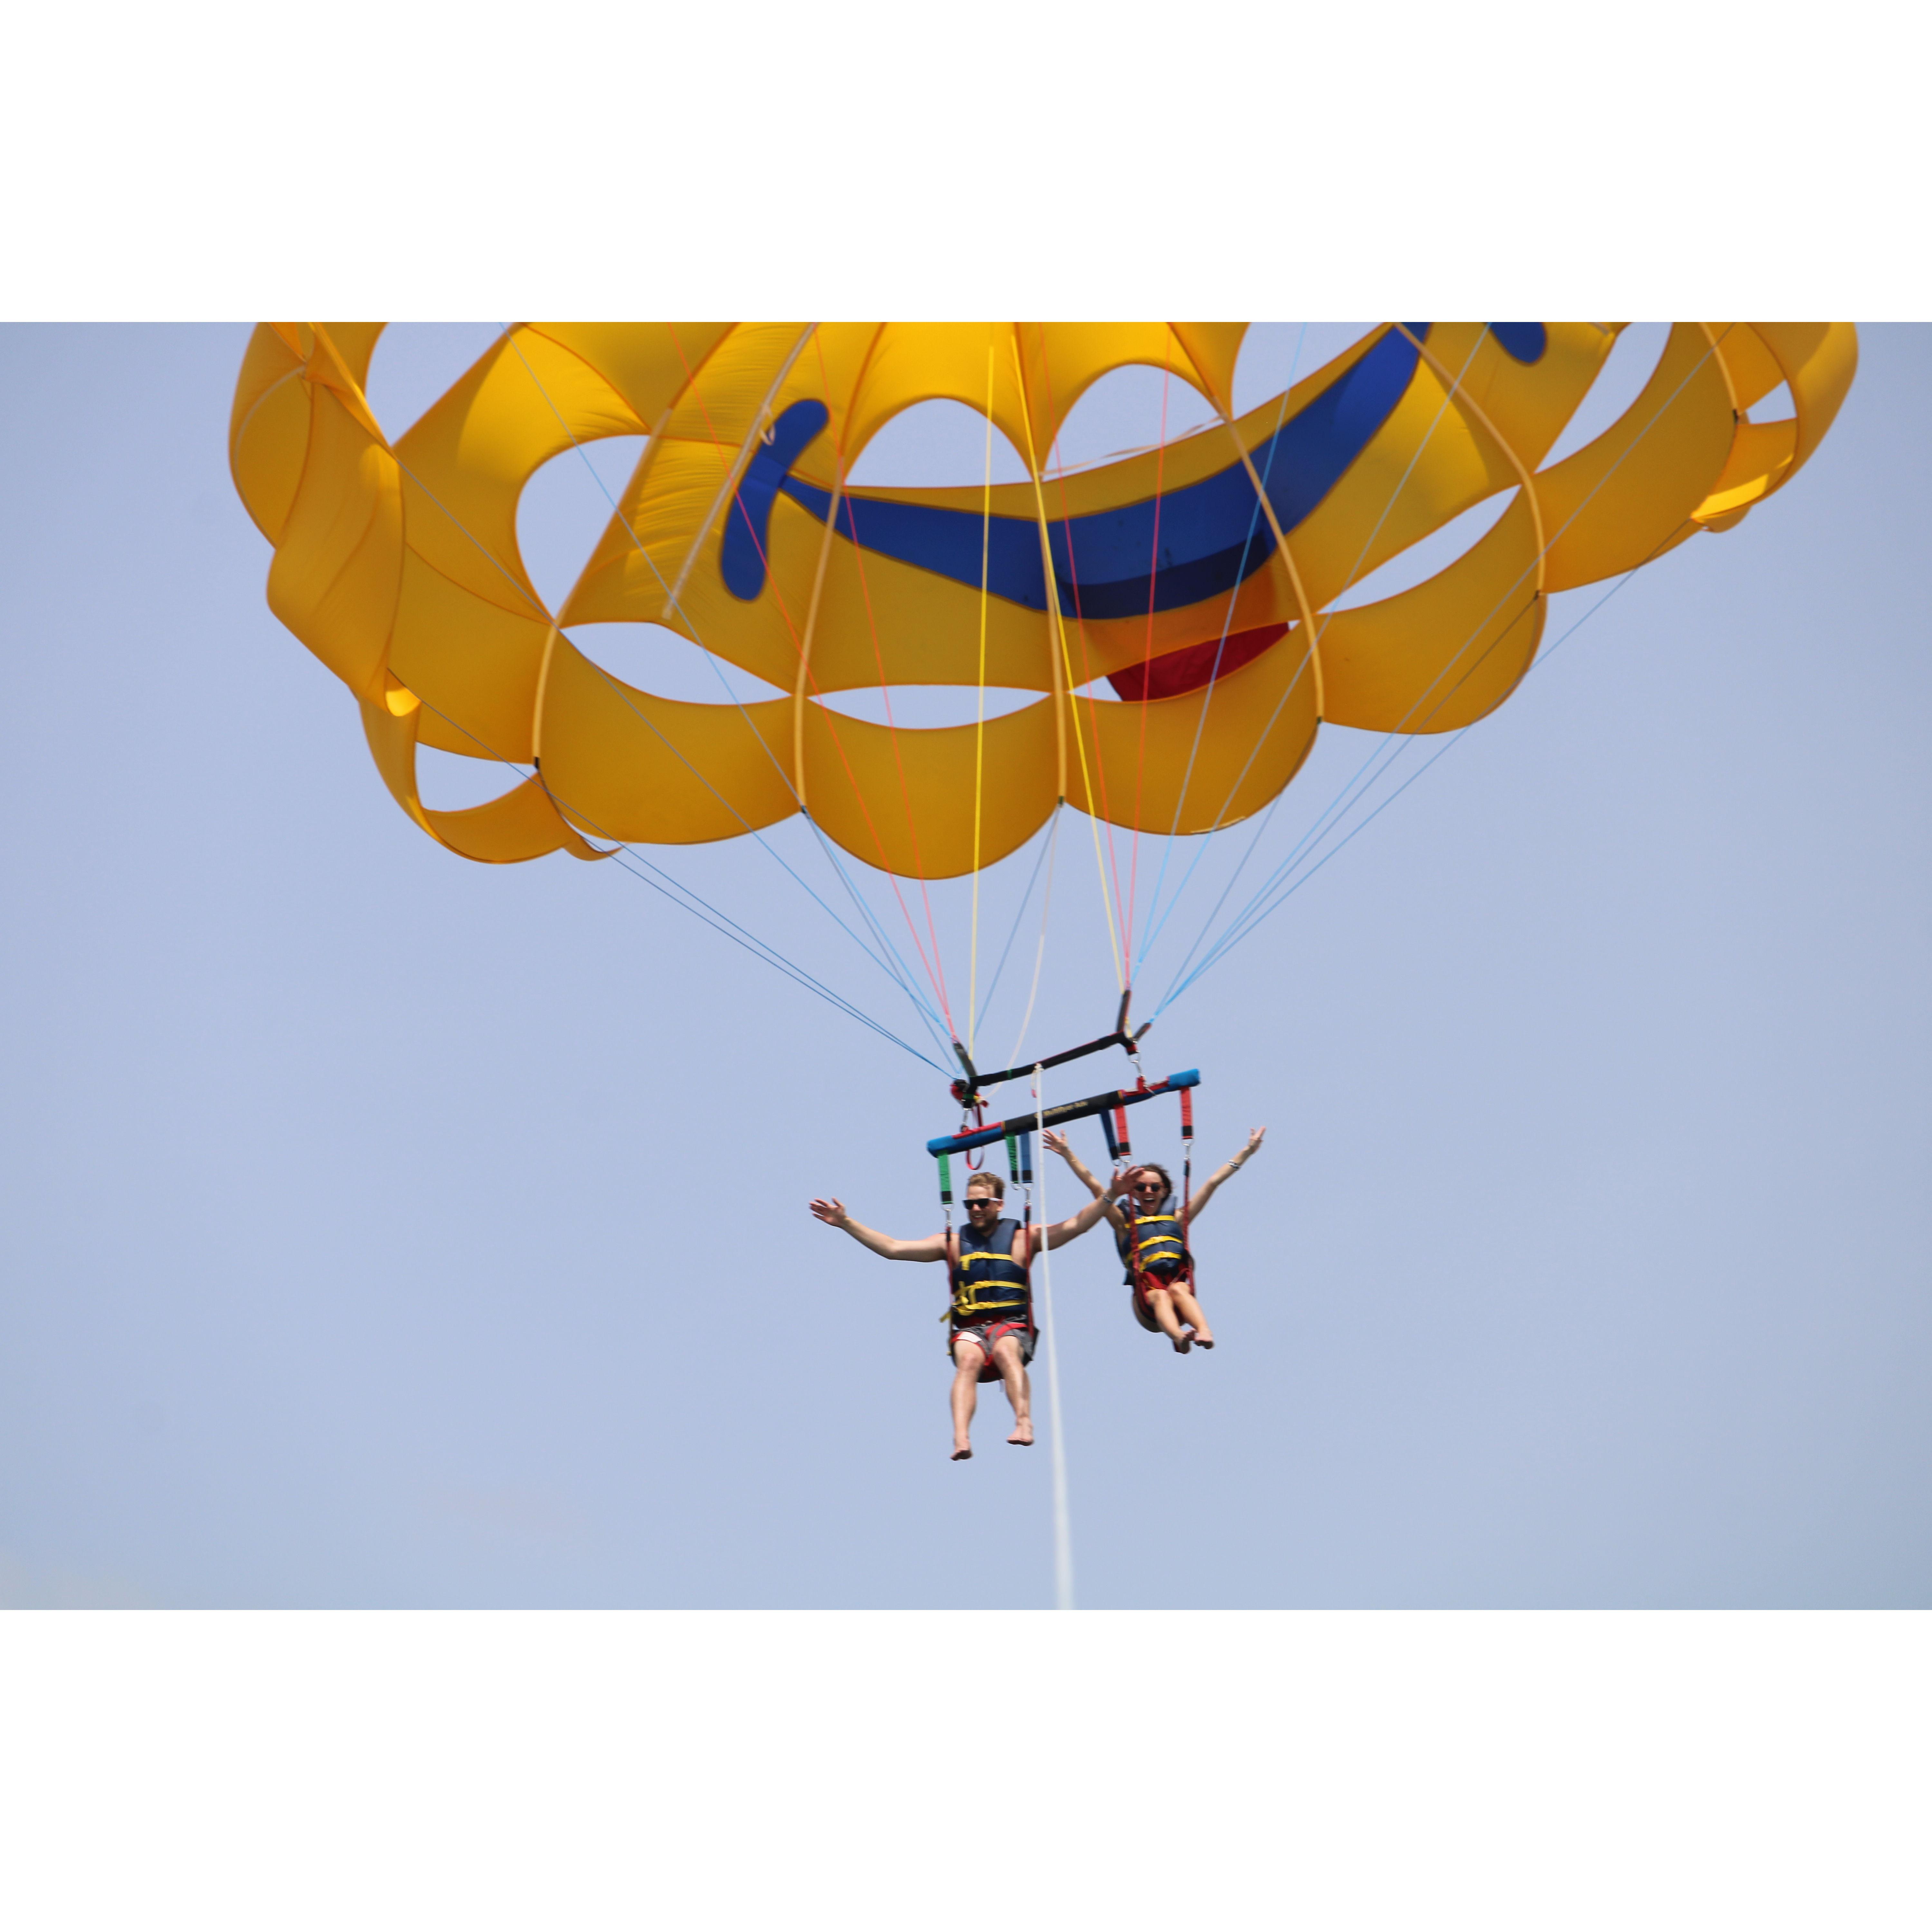 To new, and sometimes scary, adventures together! Parasailing in St. Pete's Beach, Florida